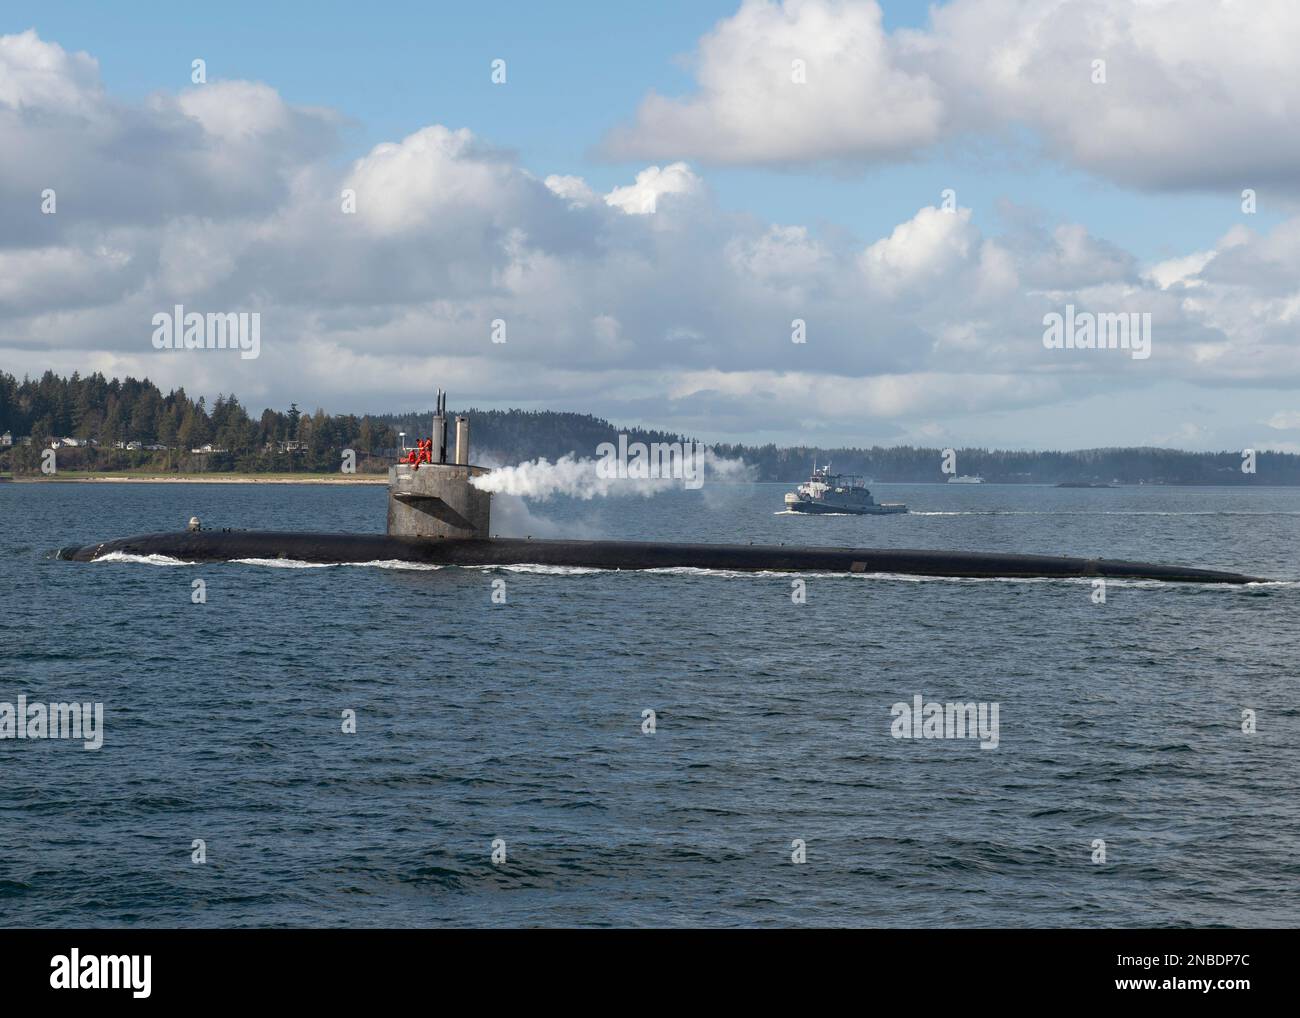 230210-N-ED185-1058  PUGET SOUND, Wash. (Feb. 10, 2023) The Los Angeles-class fast-attack submarine USS Key West (SSN 722) transits the Puget Sound before mooring at Naval Base Kitsap – Bremerton, Washington, February 10, 2023. Measuring more than 360 feet long and weighing more than 6,900 tons when submerged, Key West supports a multitude of missions to include anti-submarine warfare, anti-surface ship warfare, surveillance and reconnaissance, and strike warfare. (U.S. Navy Photo by Mass Communication Specialist 1st Class Brian. G. Reynolds) Stock Photo